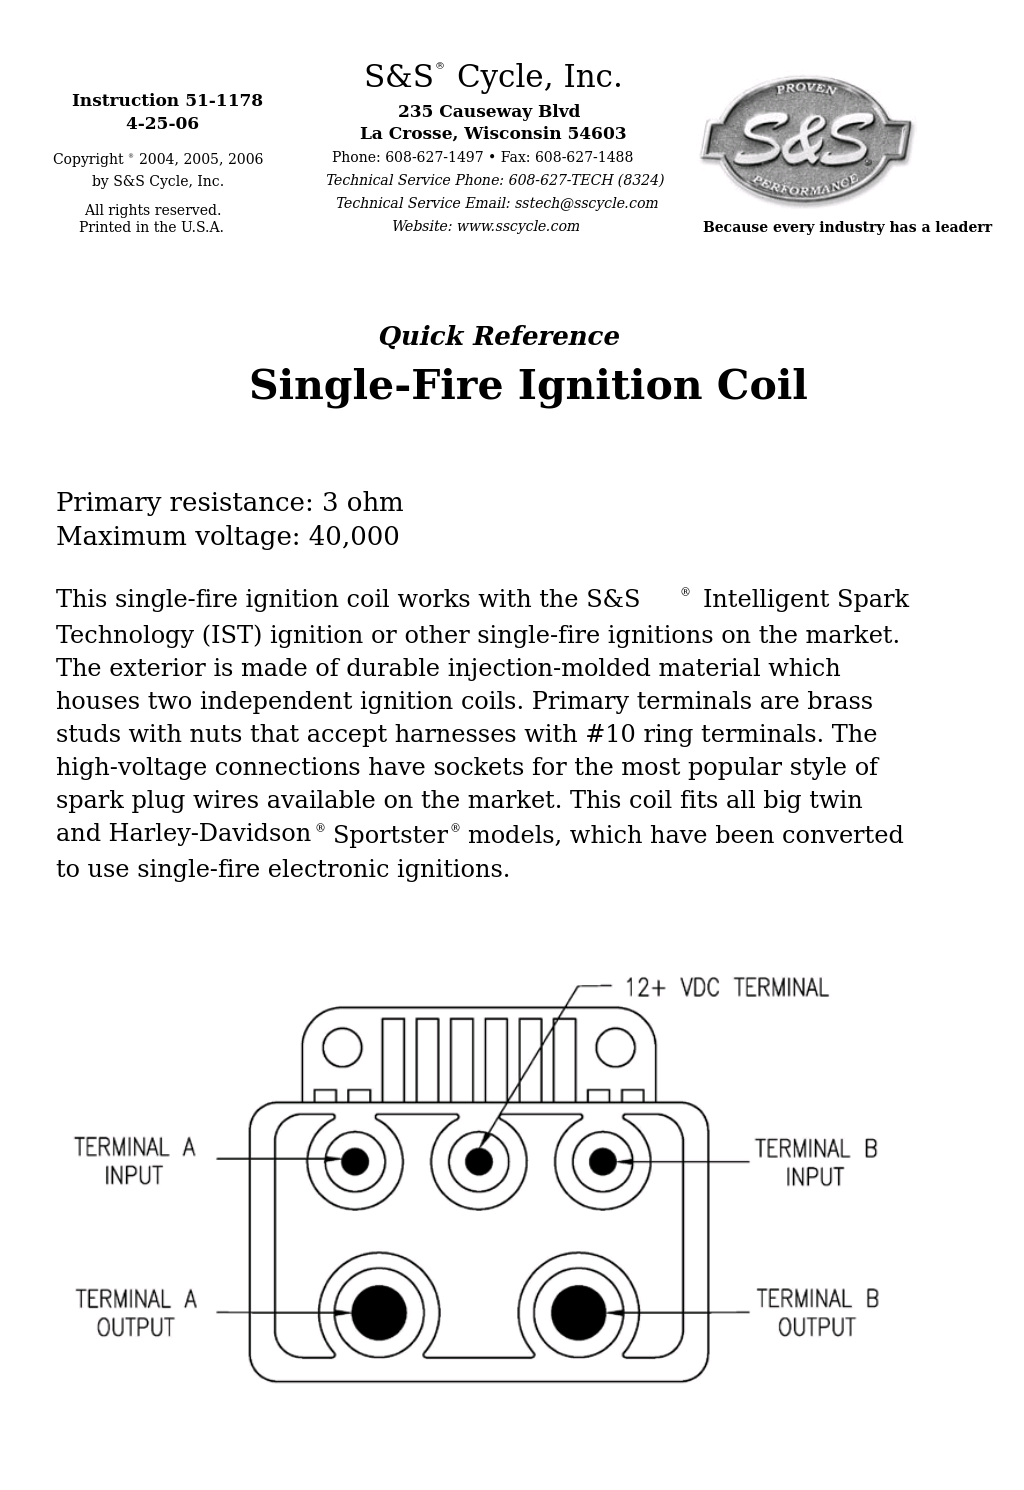 Single-Fire Ignition Coil